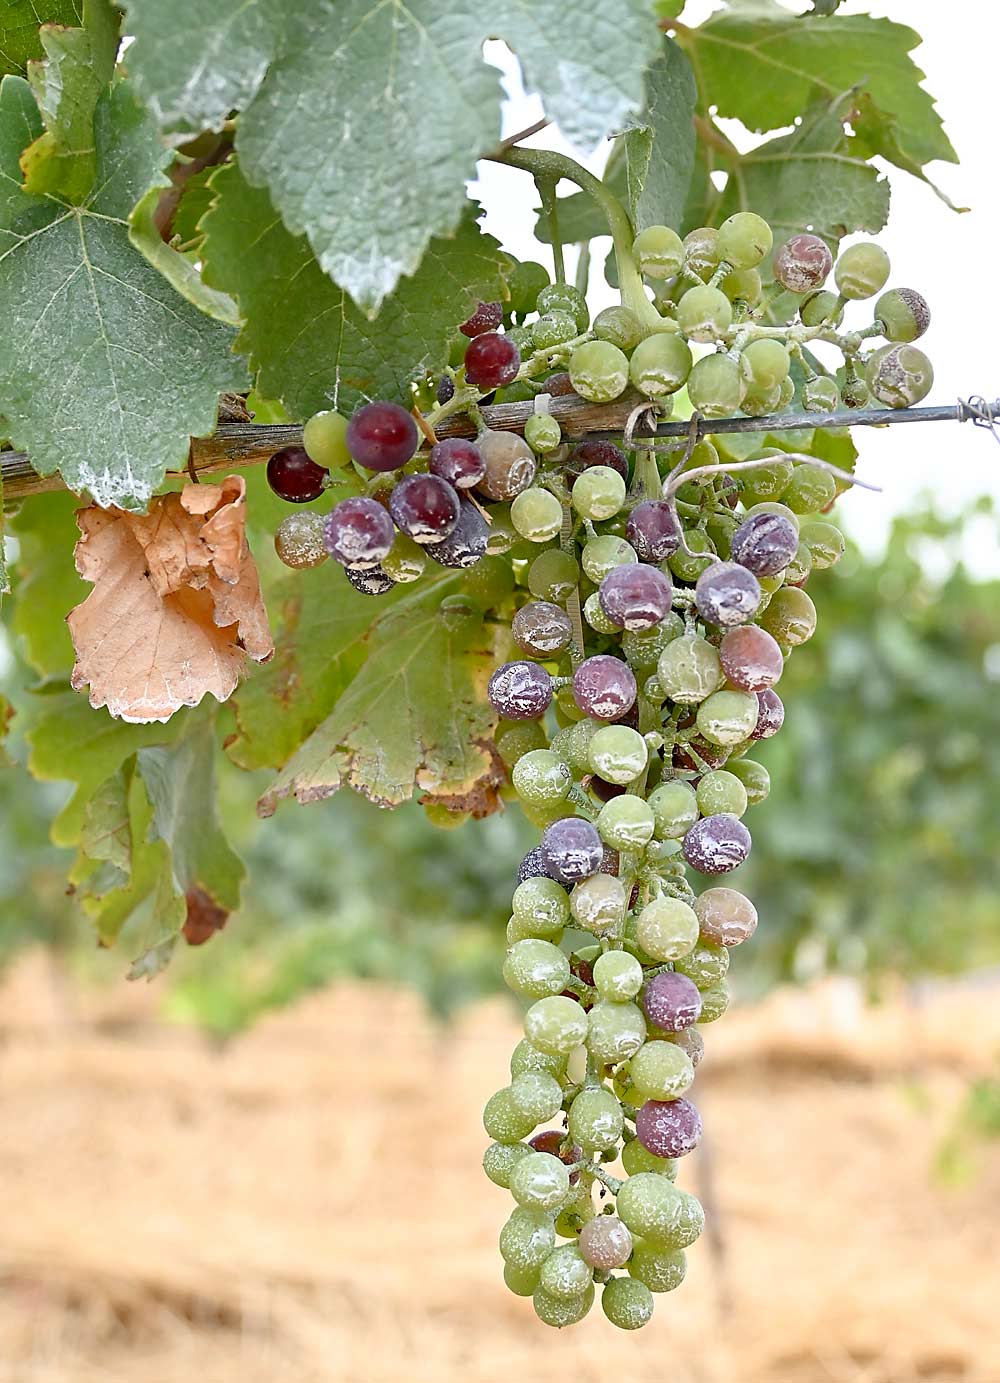 A kaolin clay product protects grape clusters from sunburn. It’s a common practice in hot Australian growing regions, said Walla Walla grower Sadie Drury, who toured Australia in 2019 to learn how to adapt to changing climate conditions in the Pacific Northwest. (Courtesy Sadie Drury/North Slope Management)